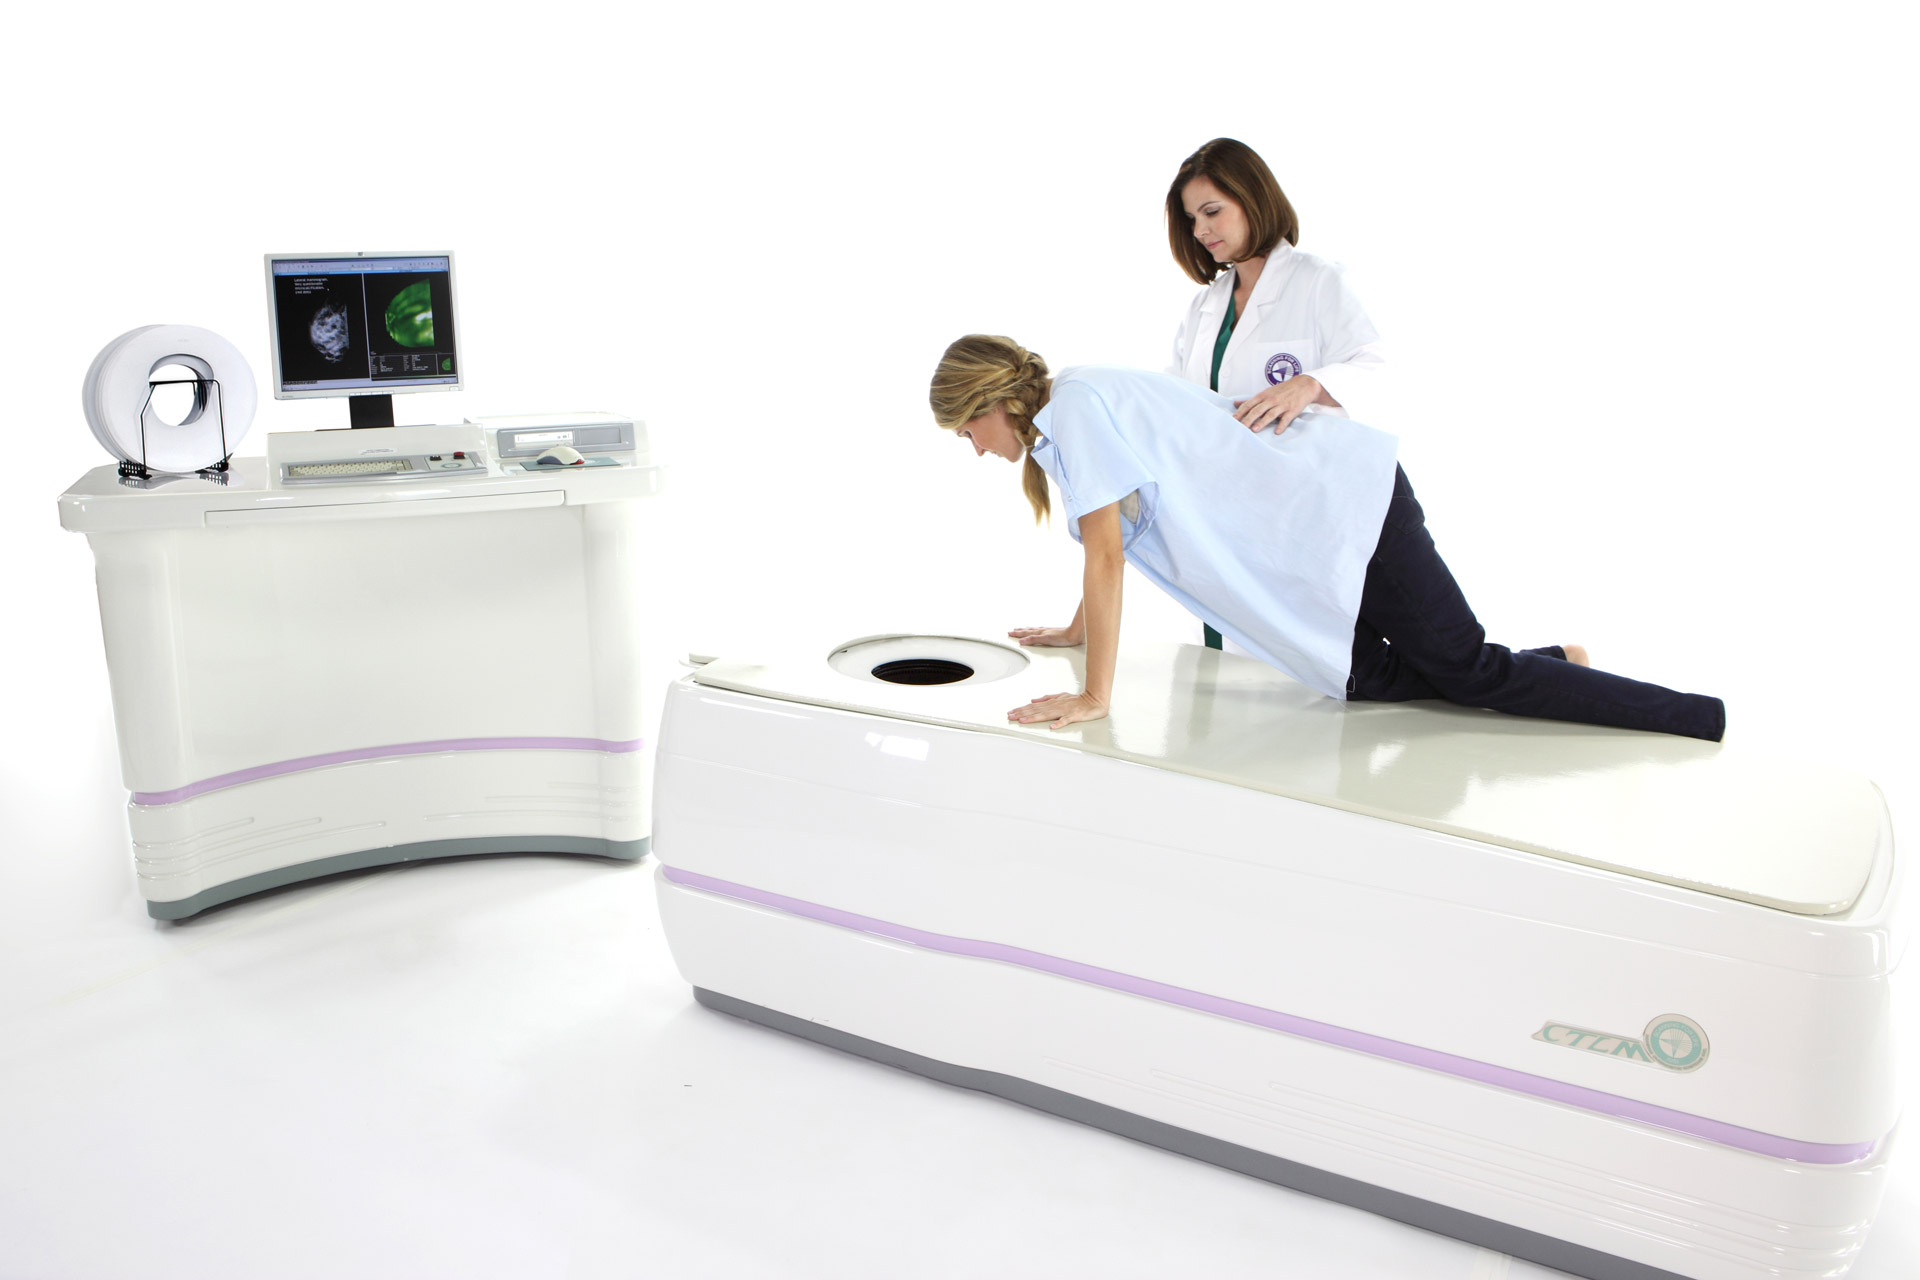 CTLM® – Laser Breast Imaging Without Compression